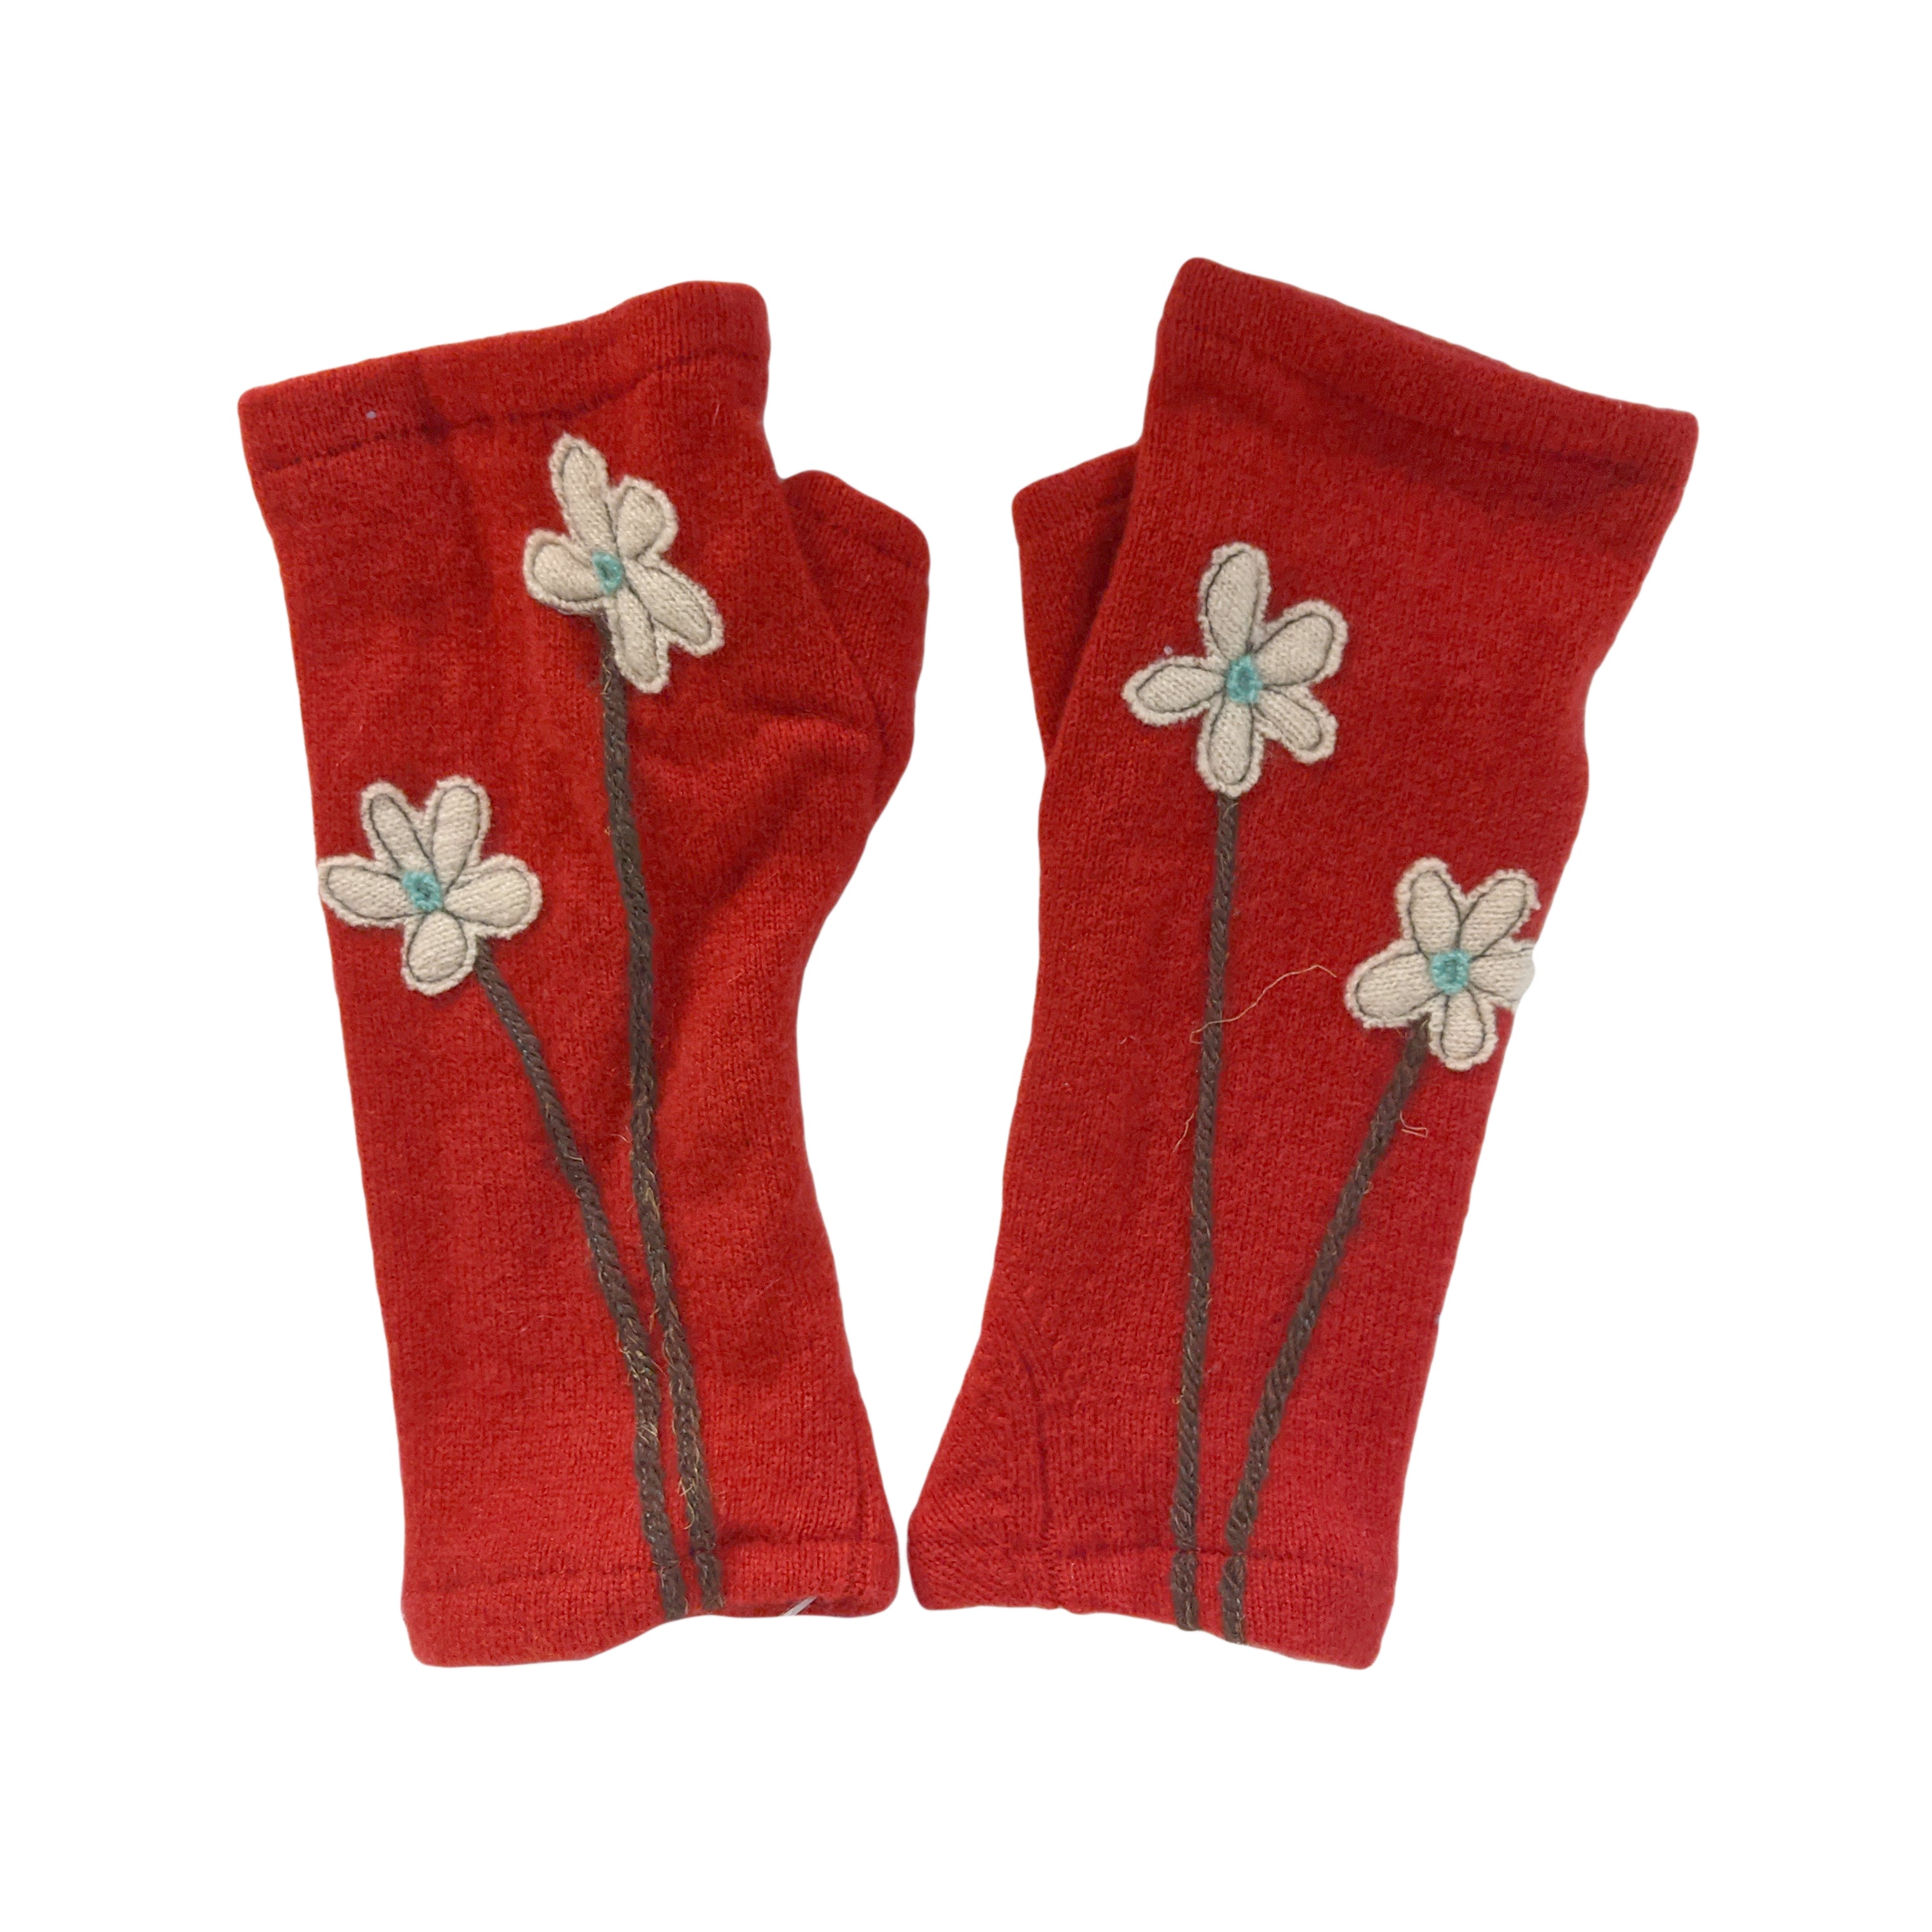 NEW! Red with White Wildflowers Cashmere Gloves by Sardine